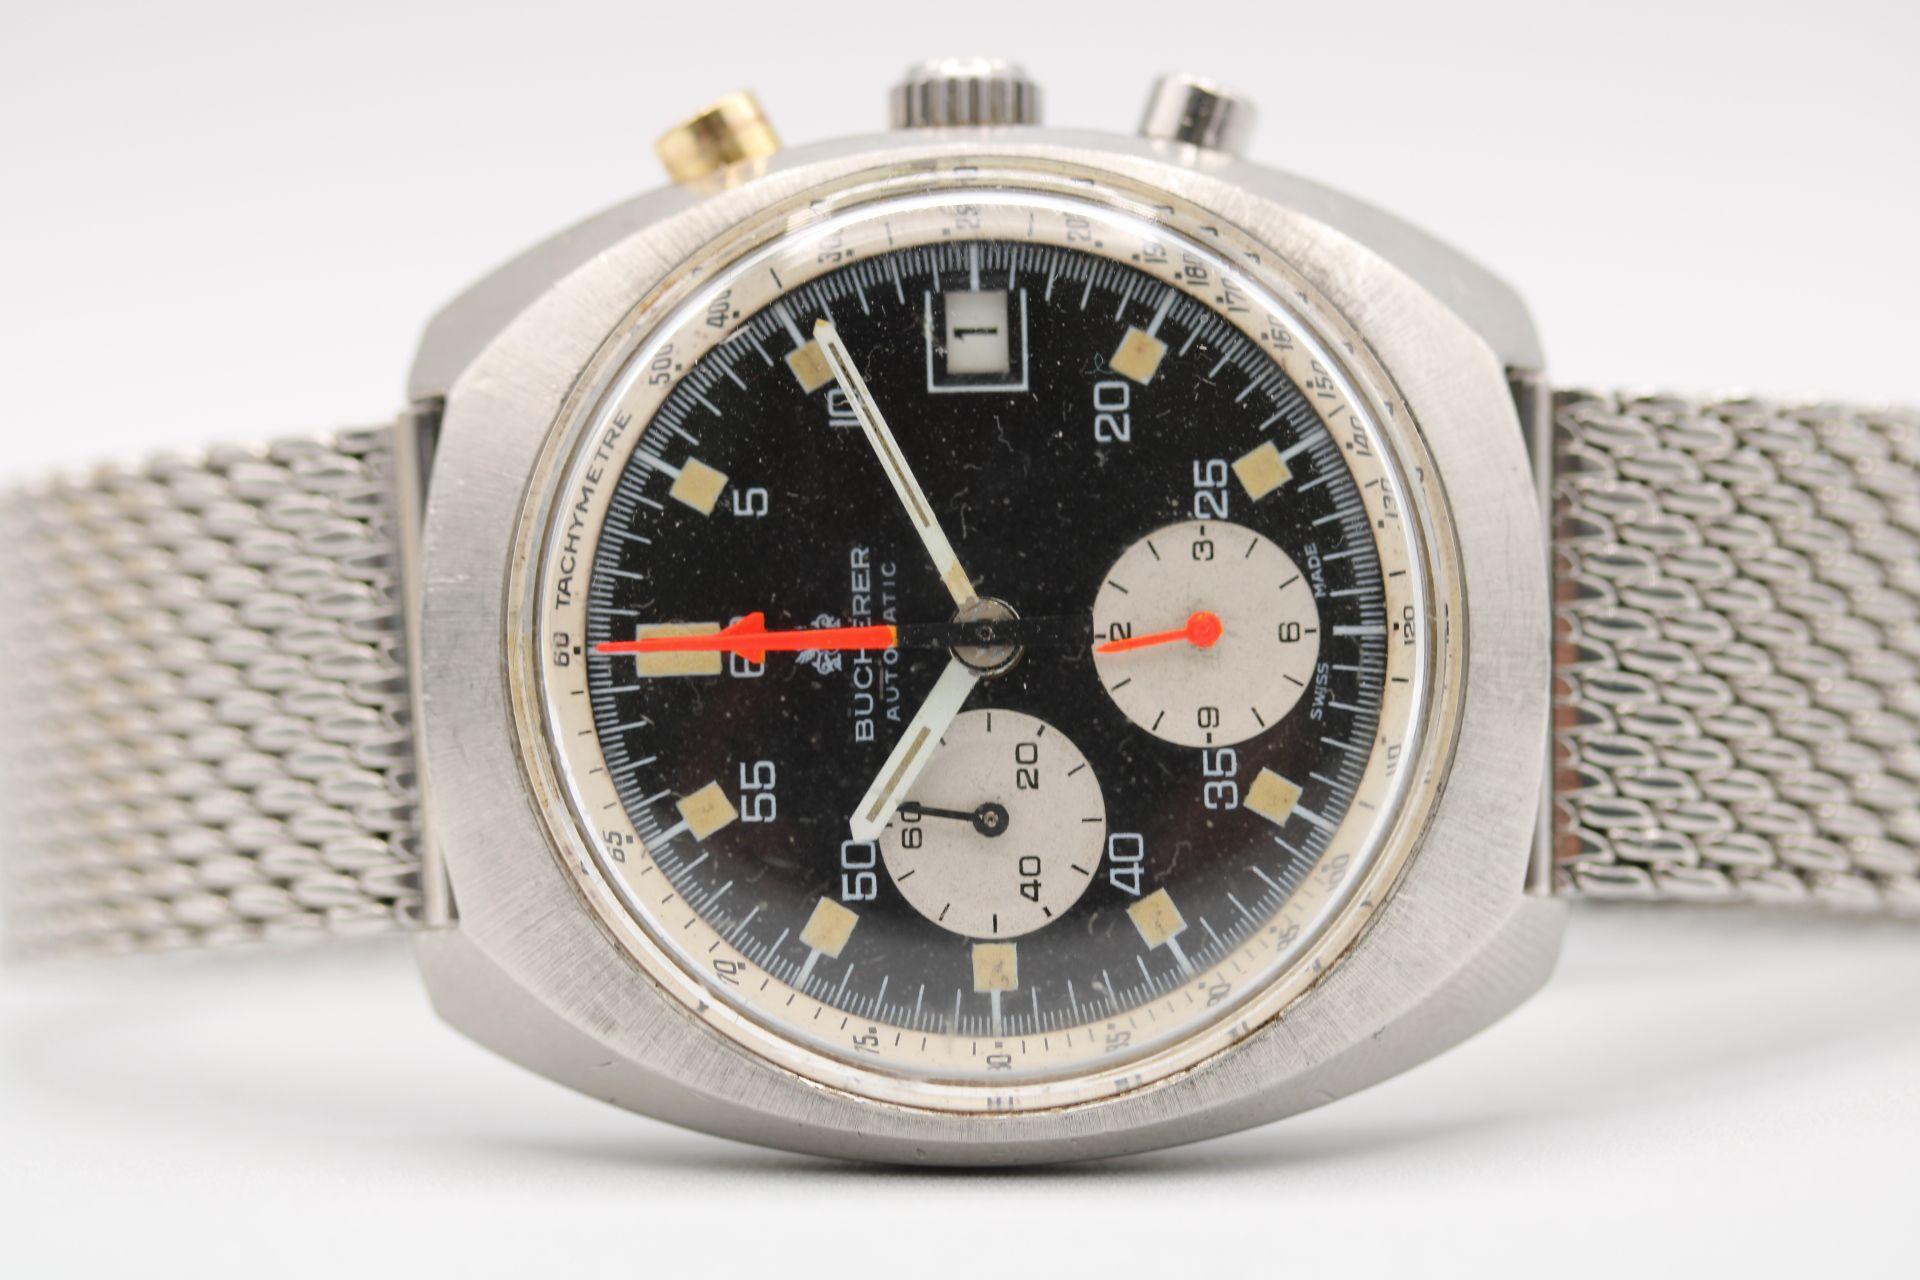 et another vintage gem that we have managed to find. We are delighted to be able to offer this Carl F Bucherer 1340 Lemania Chronograph wristwatch which comes as watch only in addition to our 12-month warranty. 

The timepiece is presented in fair